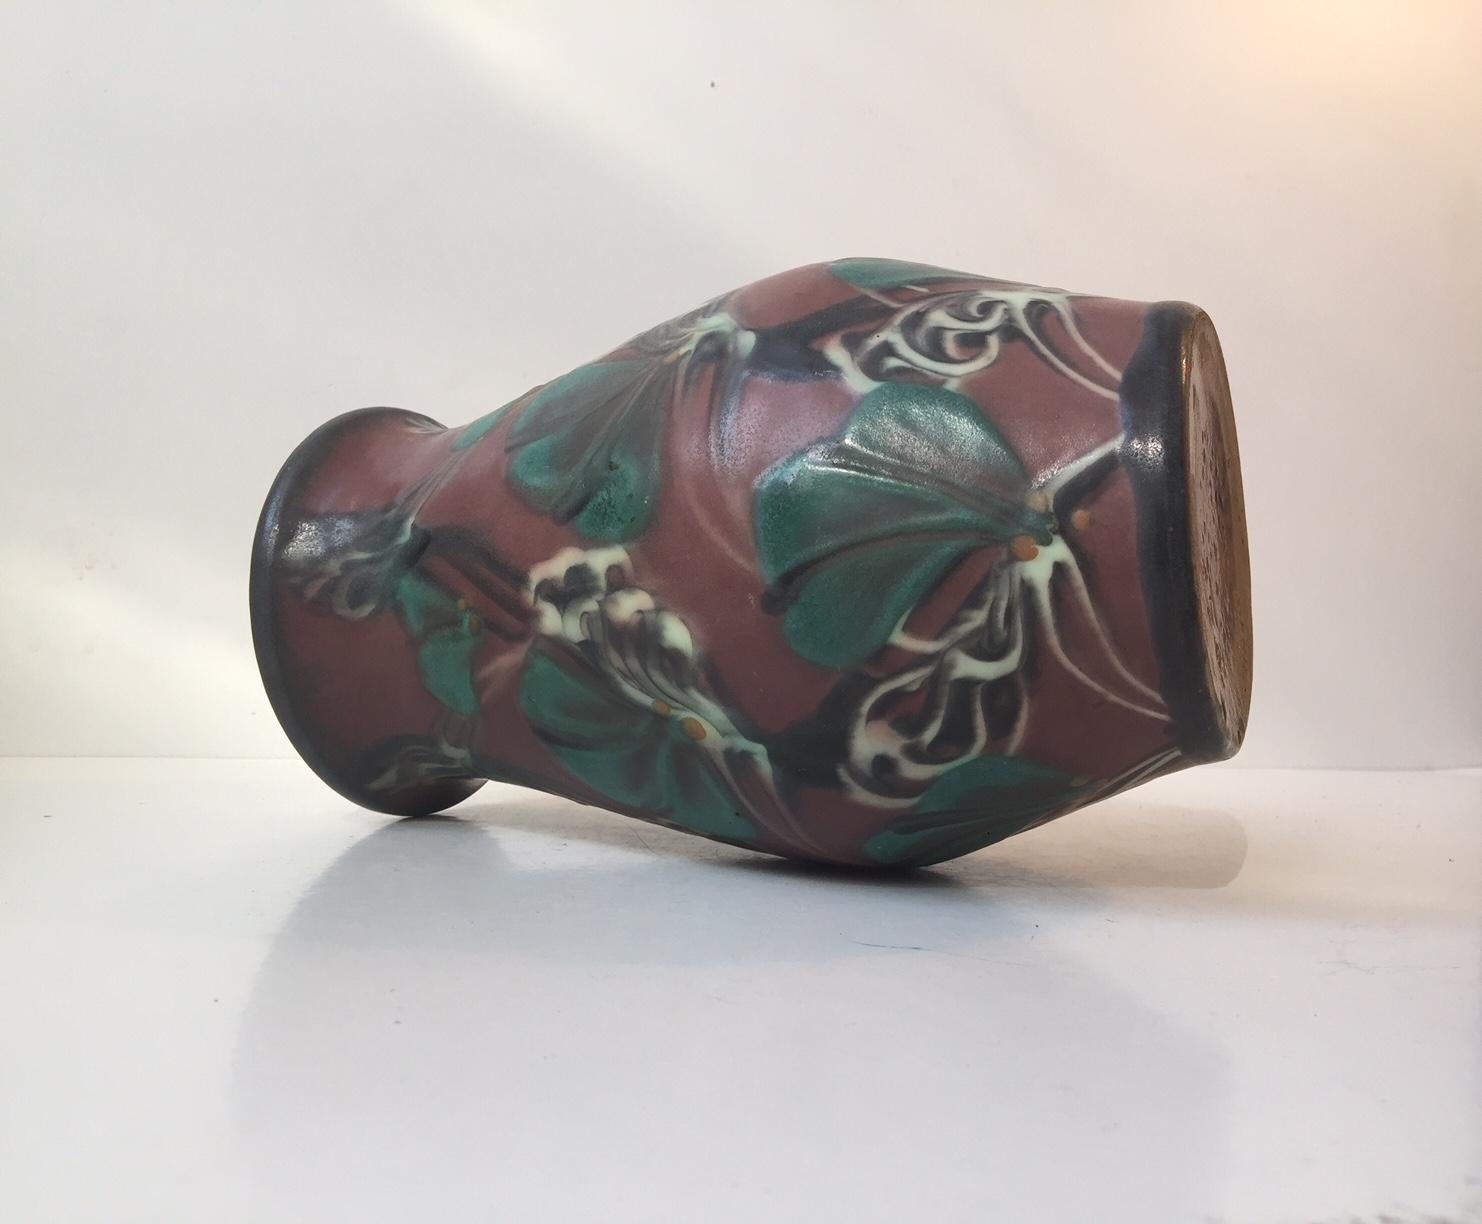 This vase is in the Skønvirke style, which derives from the French Art Nouveau and German Jugend. The floral decorations on this vase were achieved by using slip trailed glaze through a cow horn and feather quill. Using this technique Danico went in